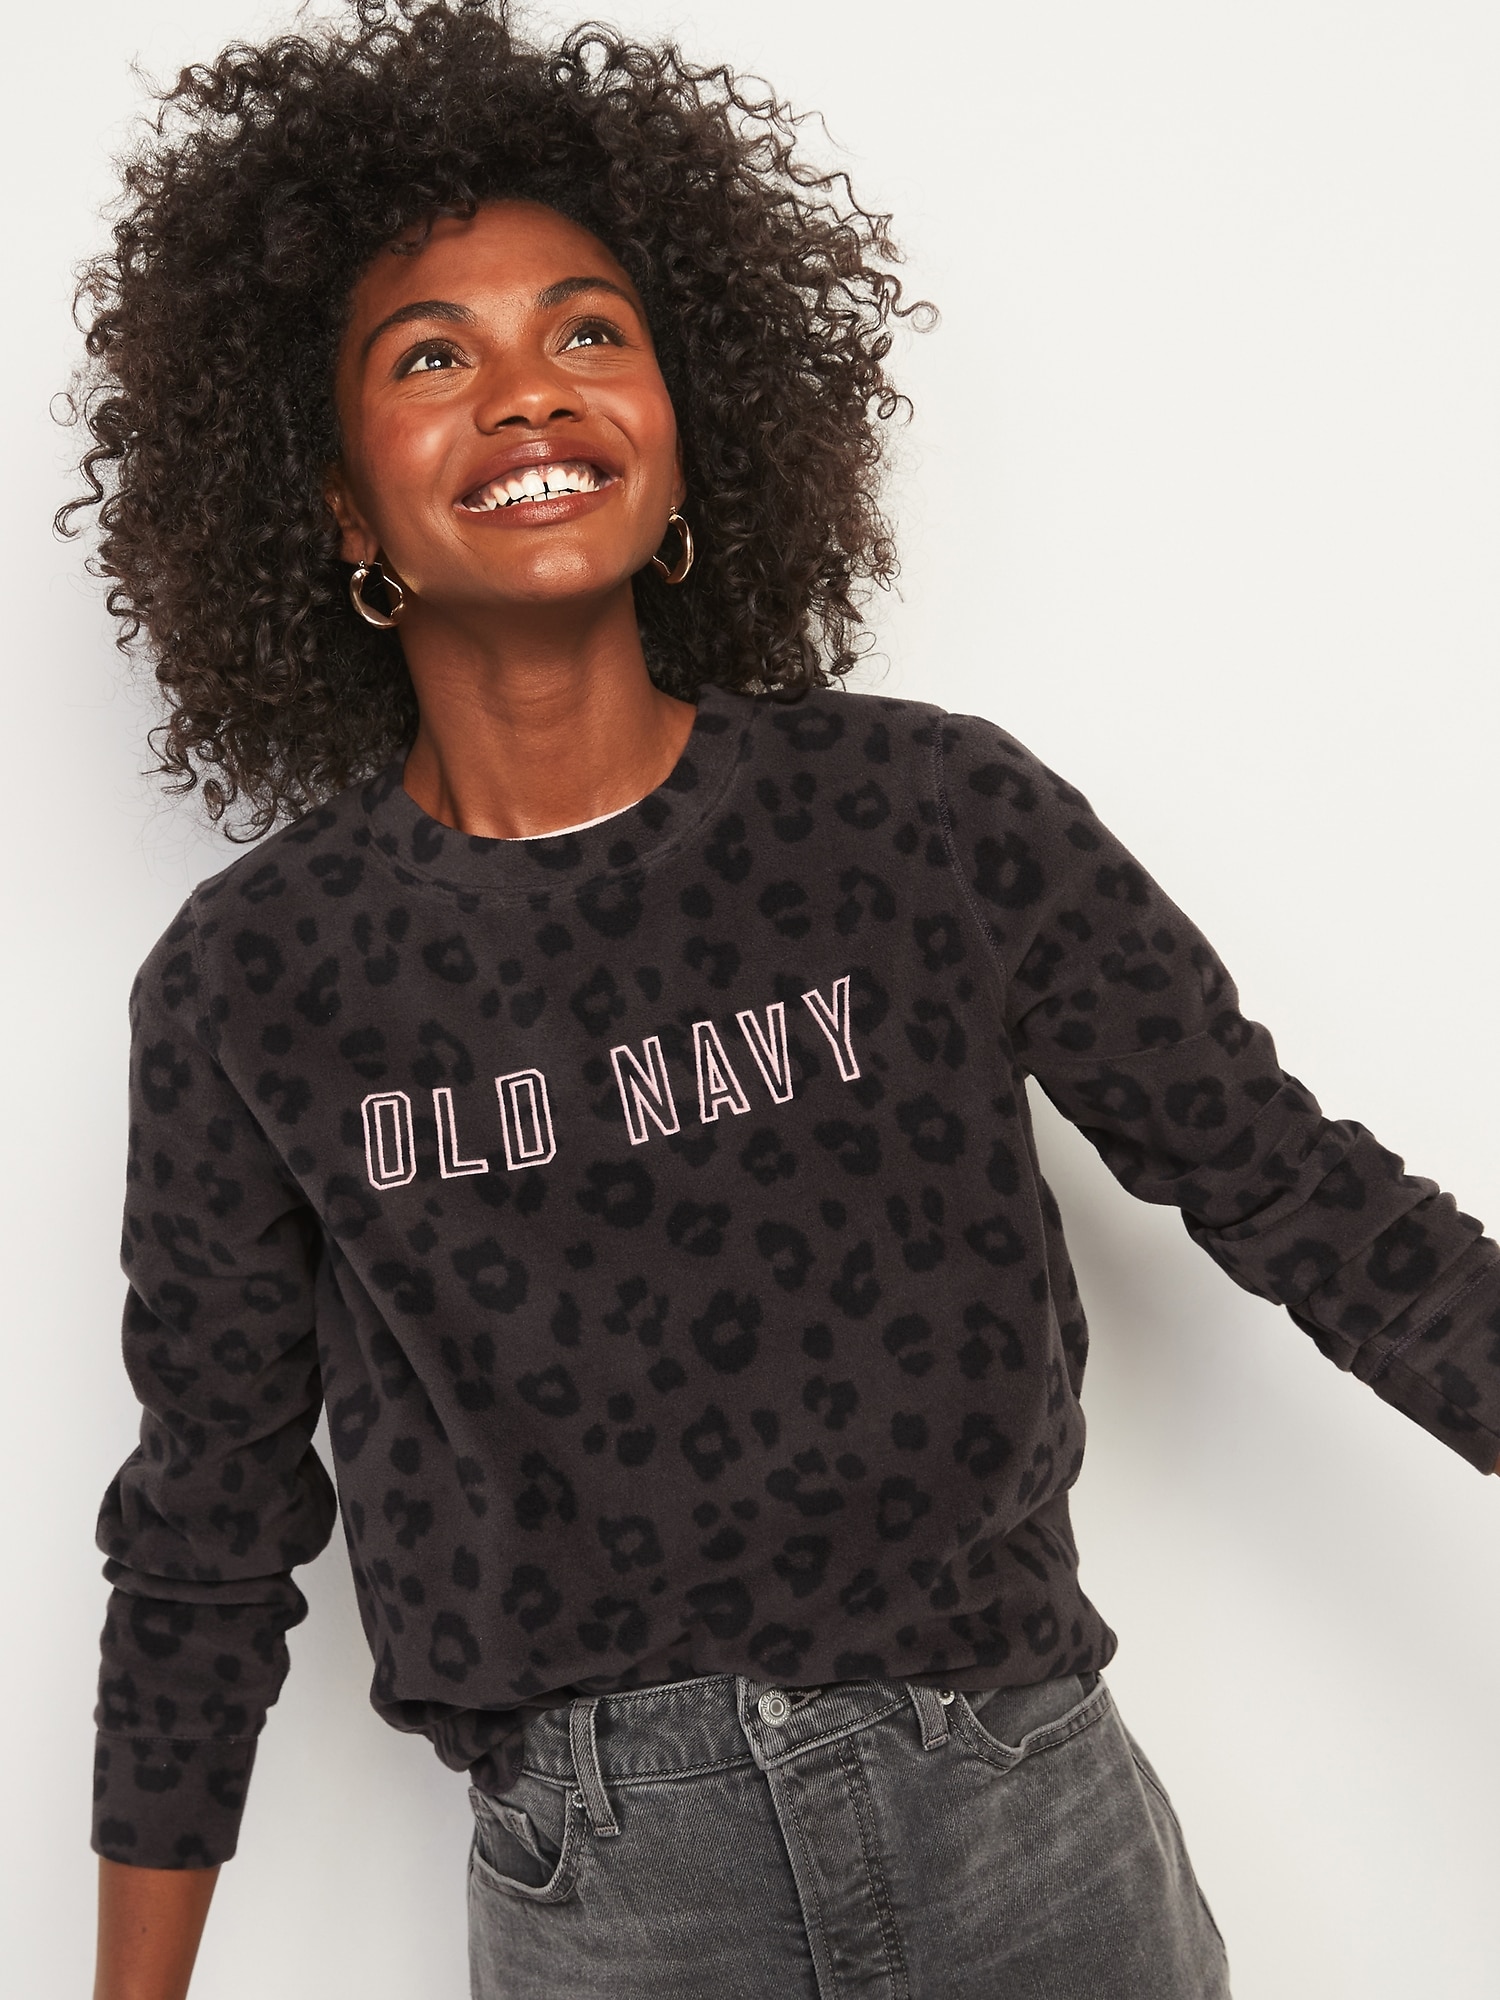 Old Navy Family Fall Haul - The Styled Press